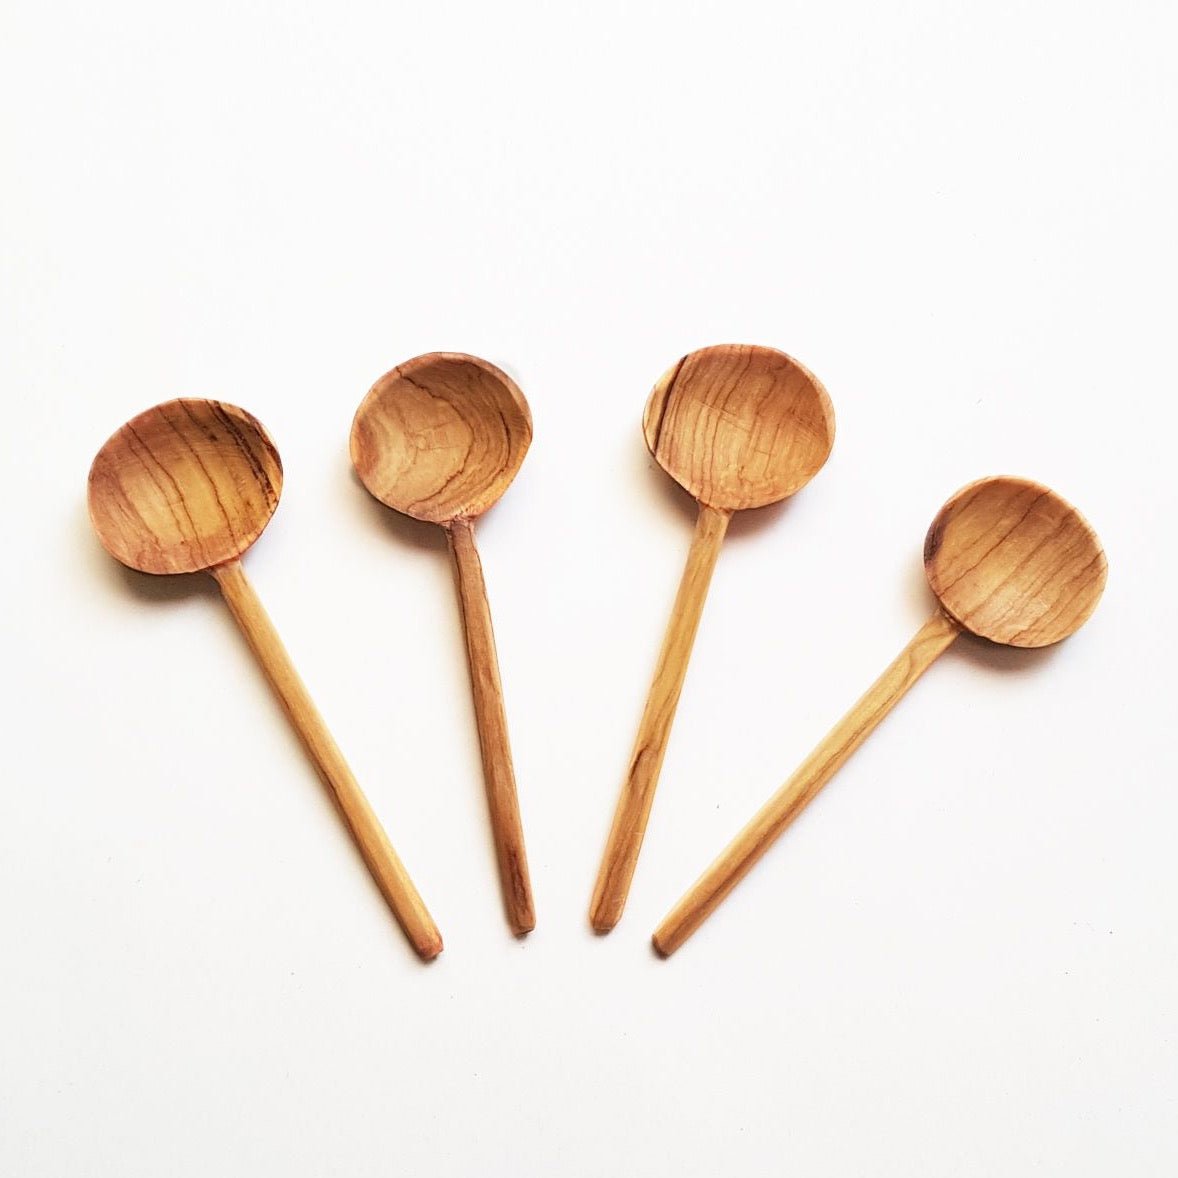 Petite spoons made of olive wood. The Olive Wood Coffee Spoon is designed by Creative Women and hand carved in Kenya.